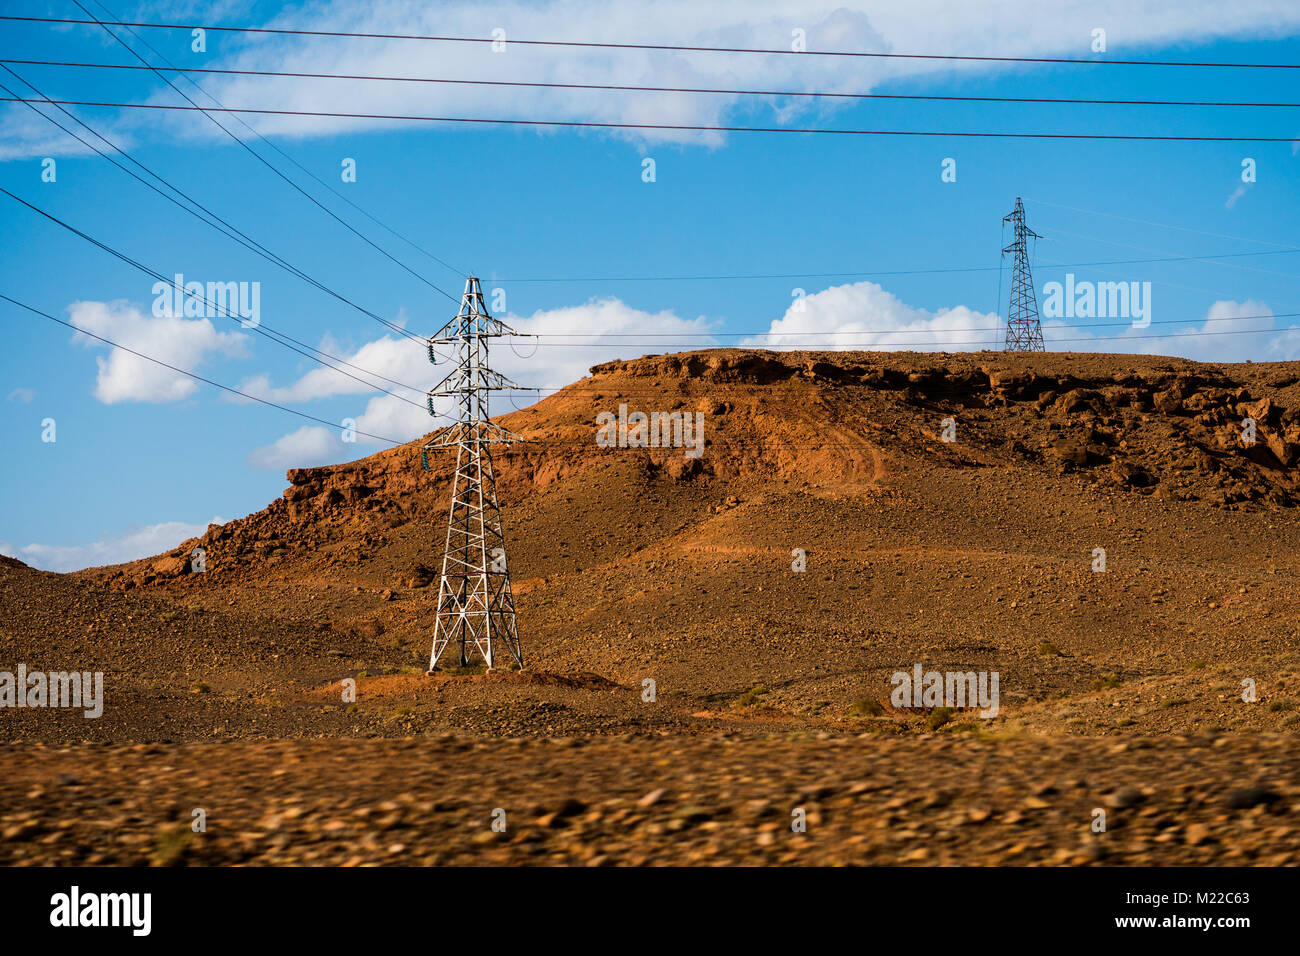 High voltage transmission towers for electricity in Sahara desert in Morocco, Africa Stock Photo